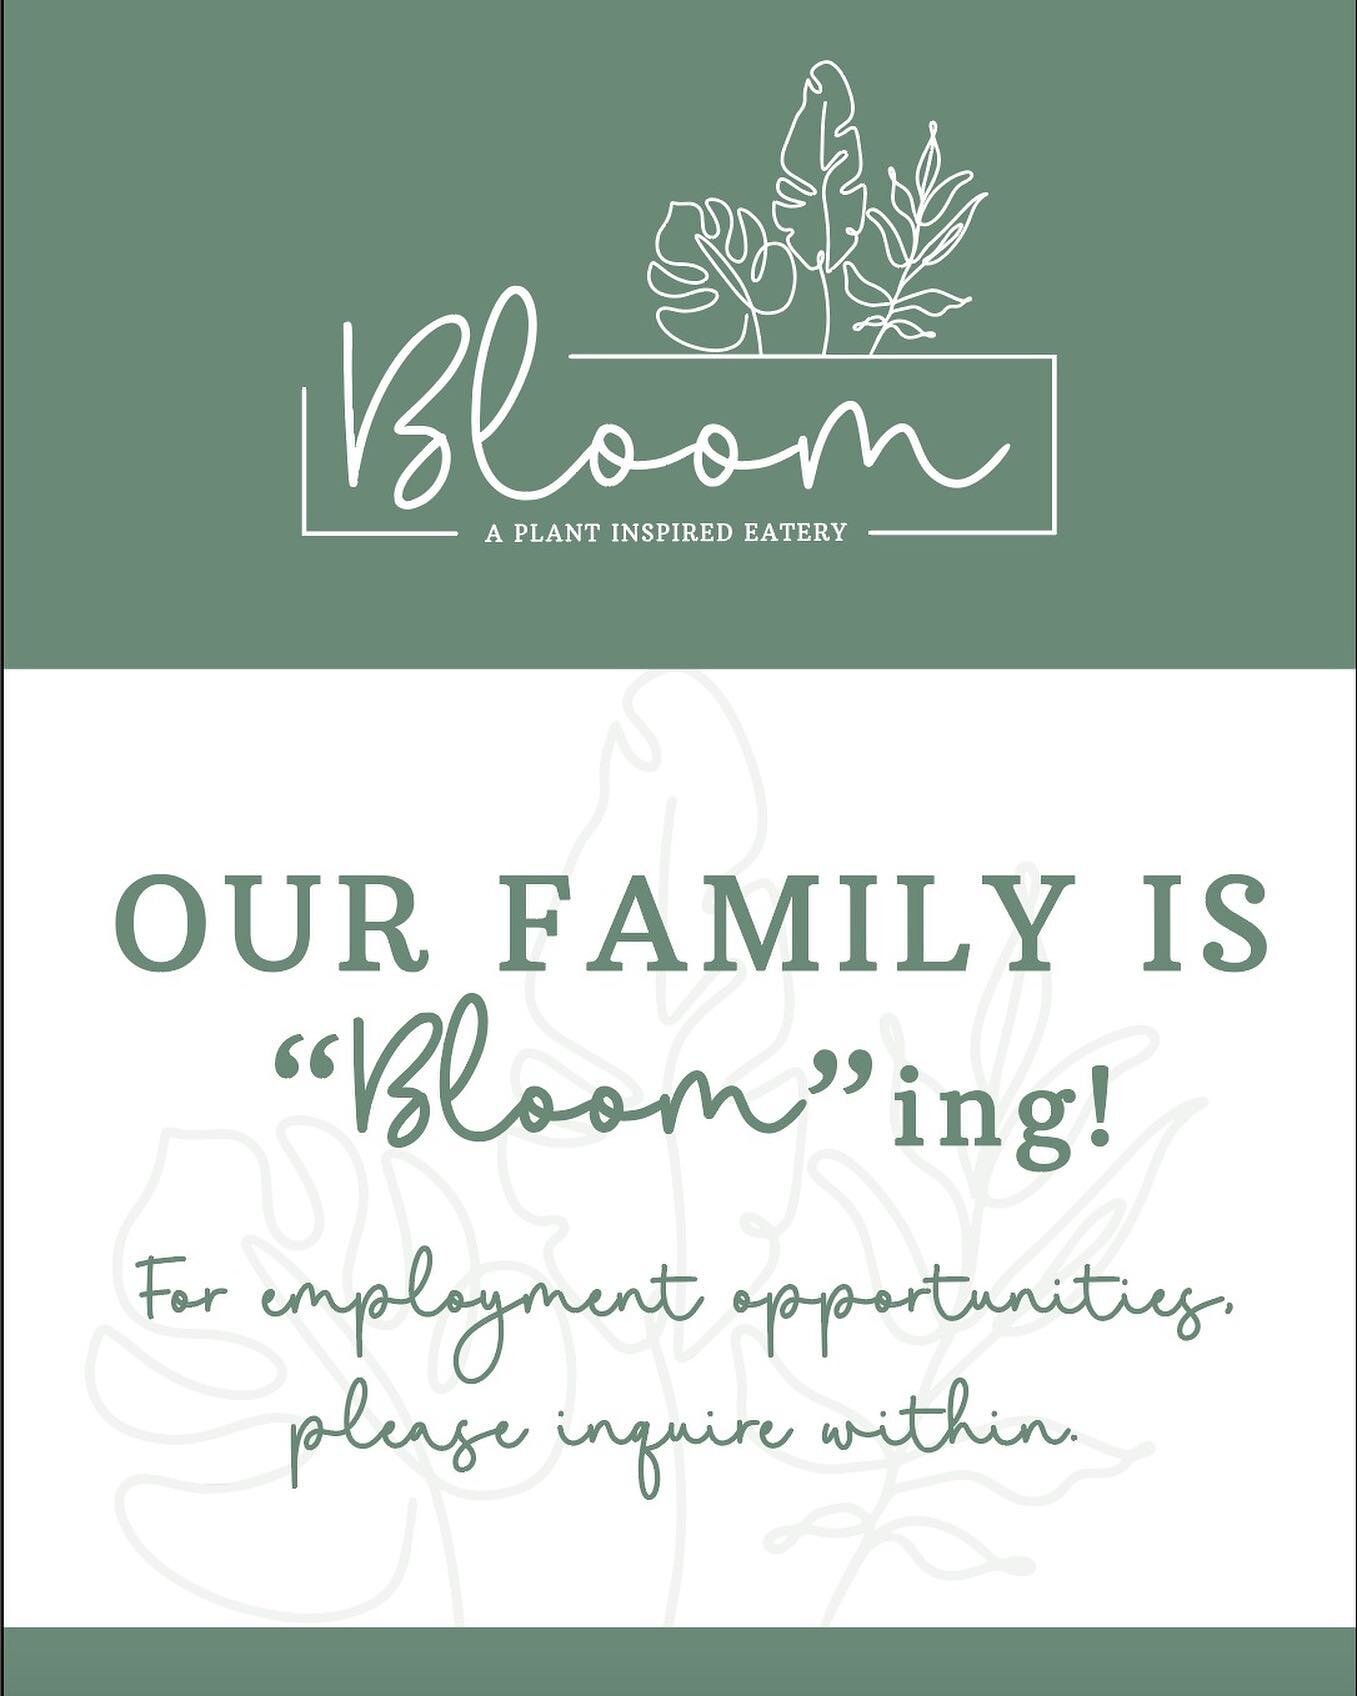 Our new Richmond, UT location is coming along nicely and we are looking to build a team as amazing as we have downtown! At this time we are accepting applicants for our RICHMOND LOCATION only. Please send resume and availability to hello@bloomlogan.c